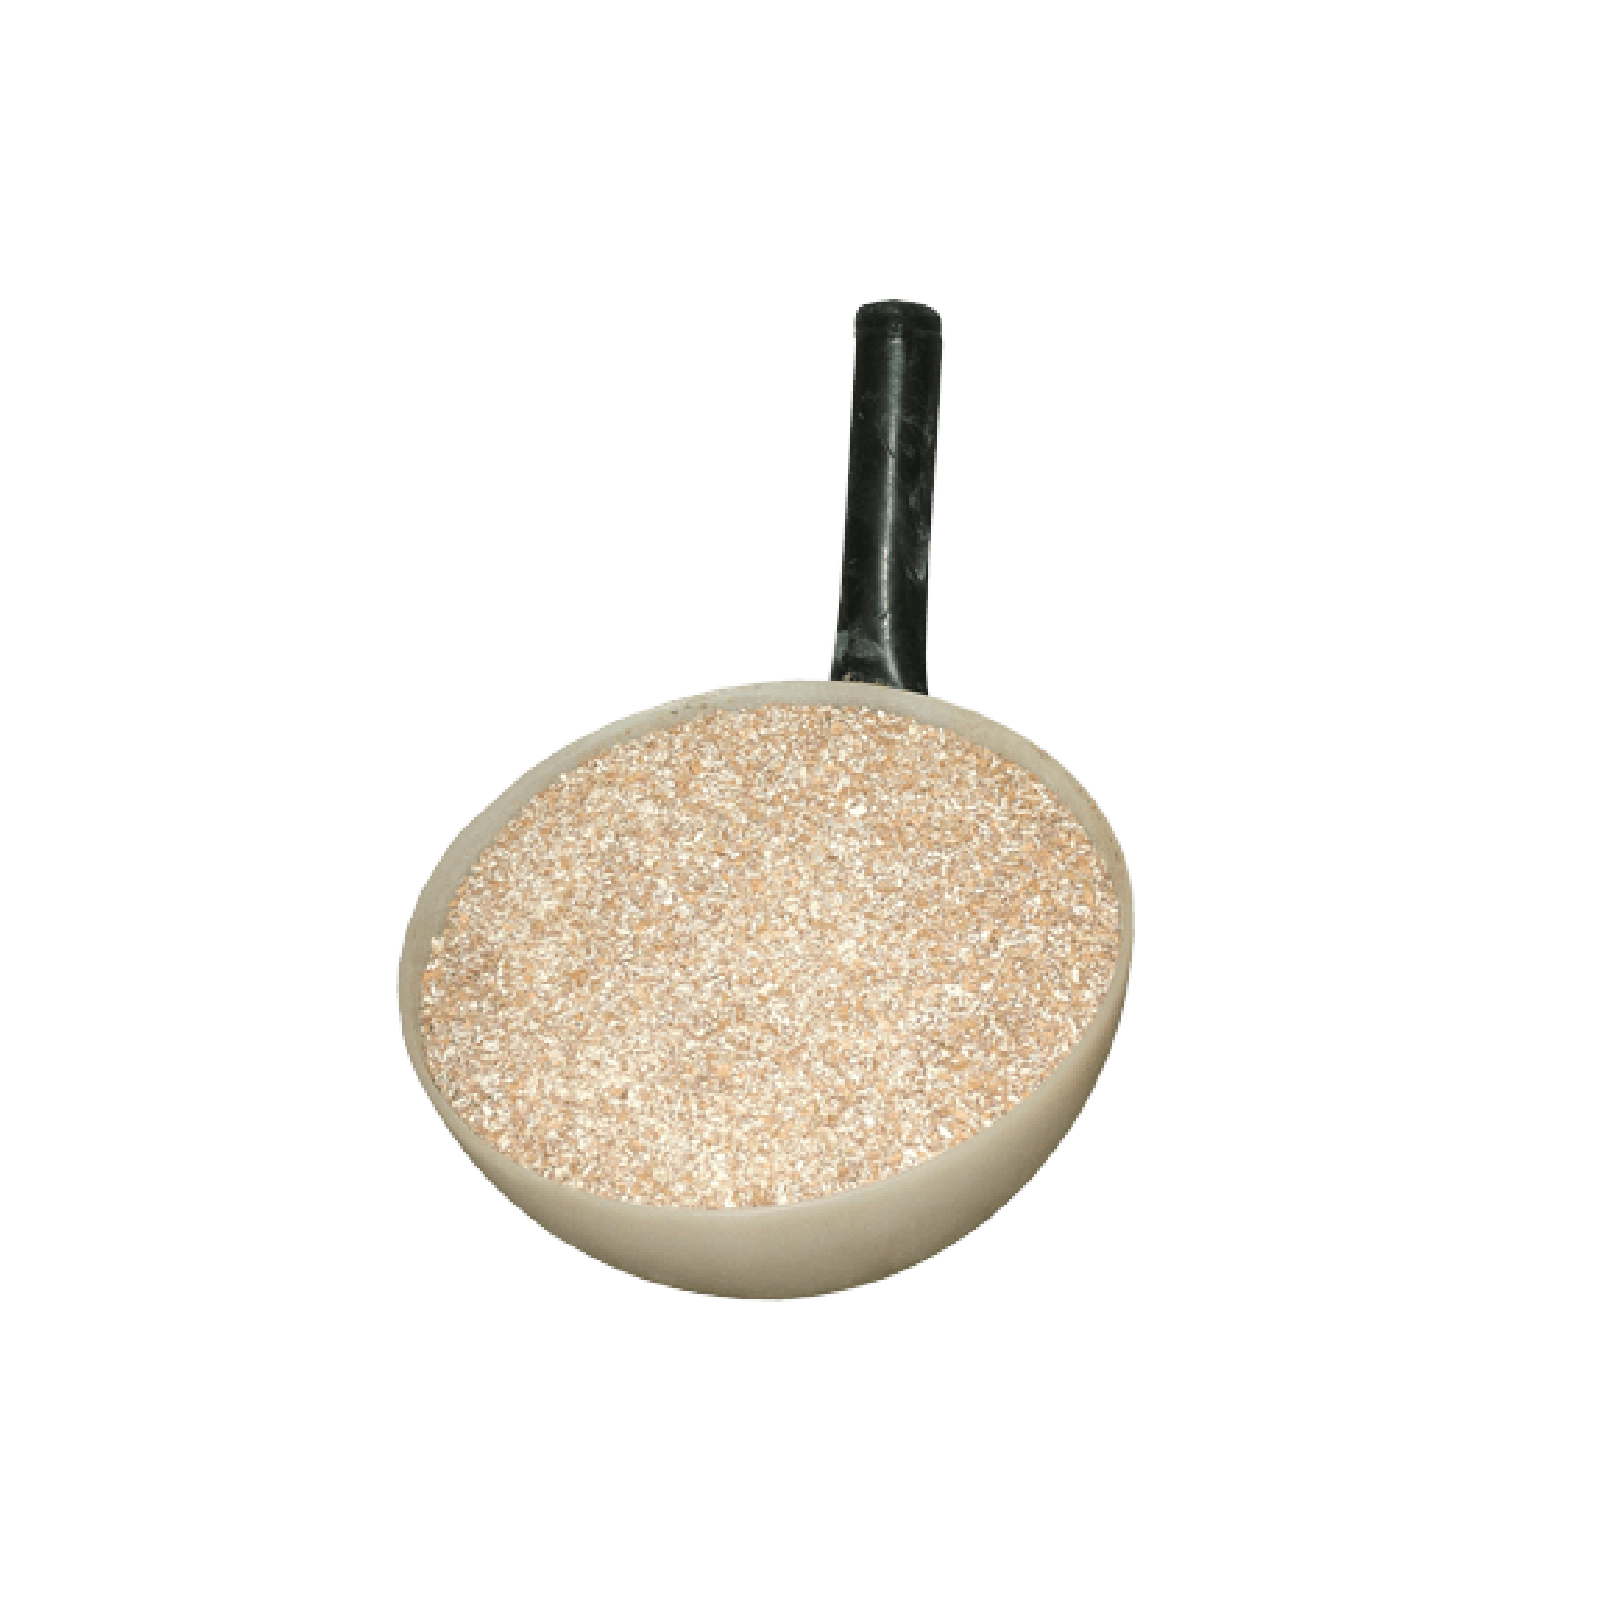 Baileys Cooked Cereal Meal Scoop